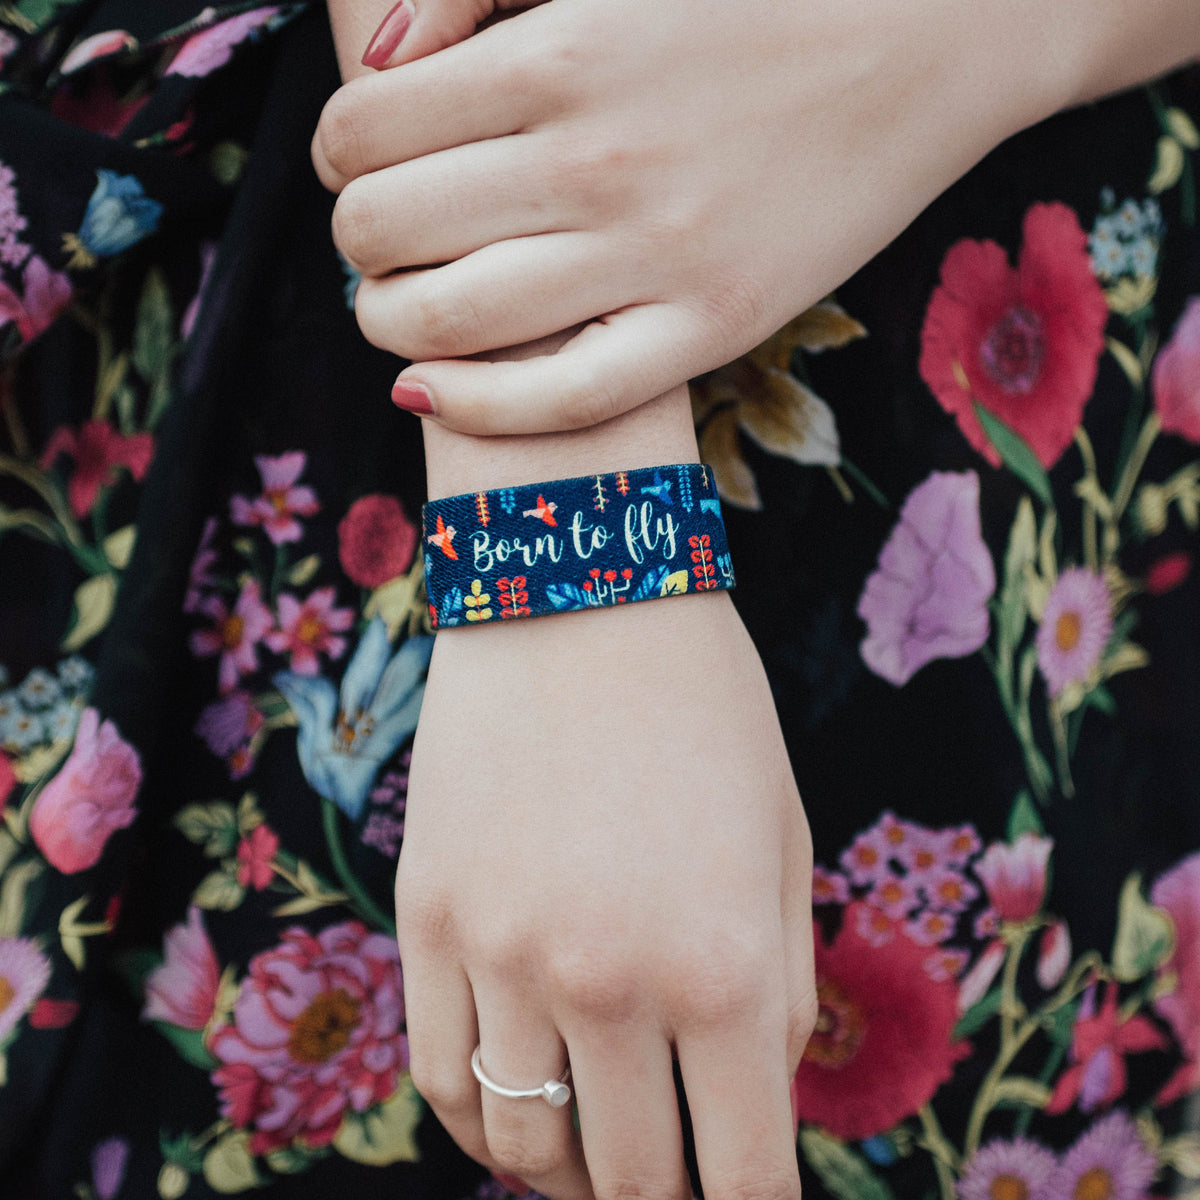 Born to Fly-Sold Out-ZOX - This item is sold out and will not be restocked.